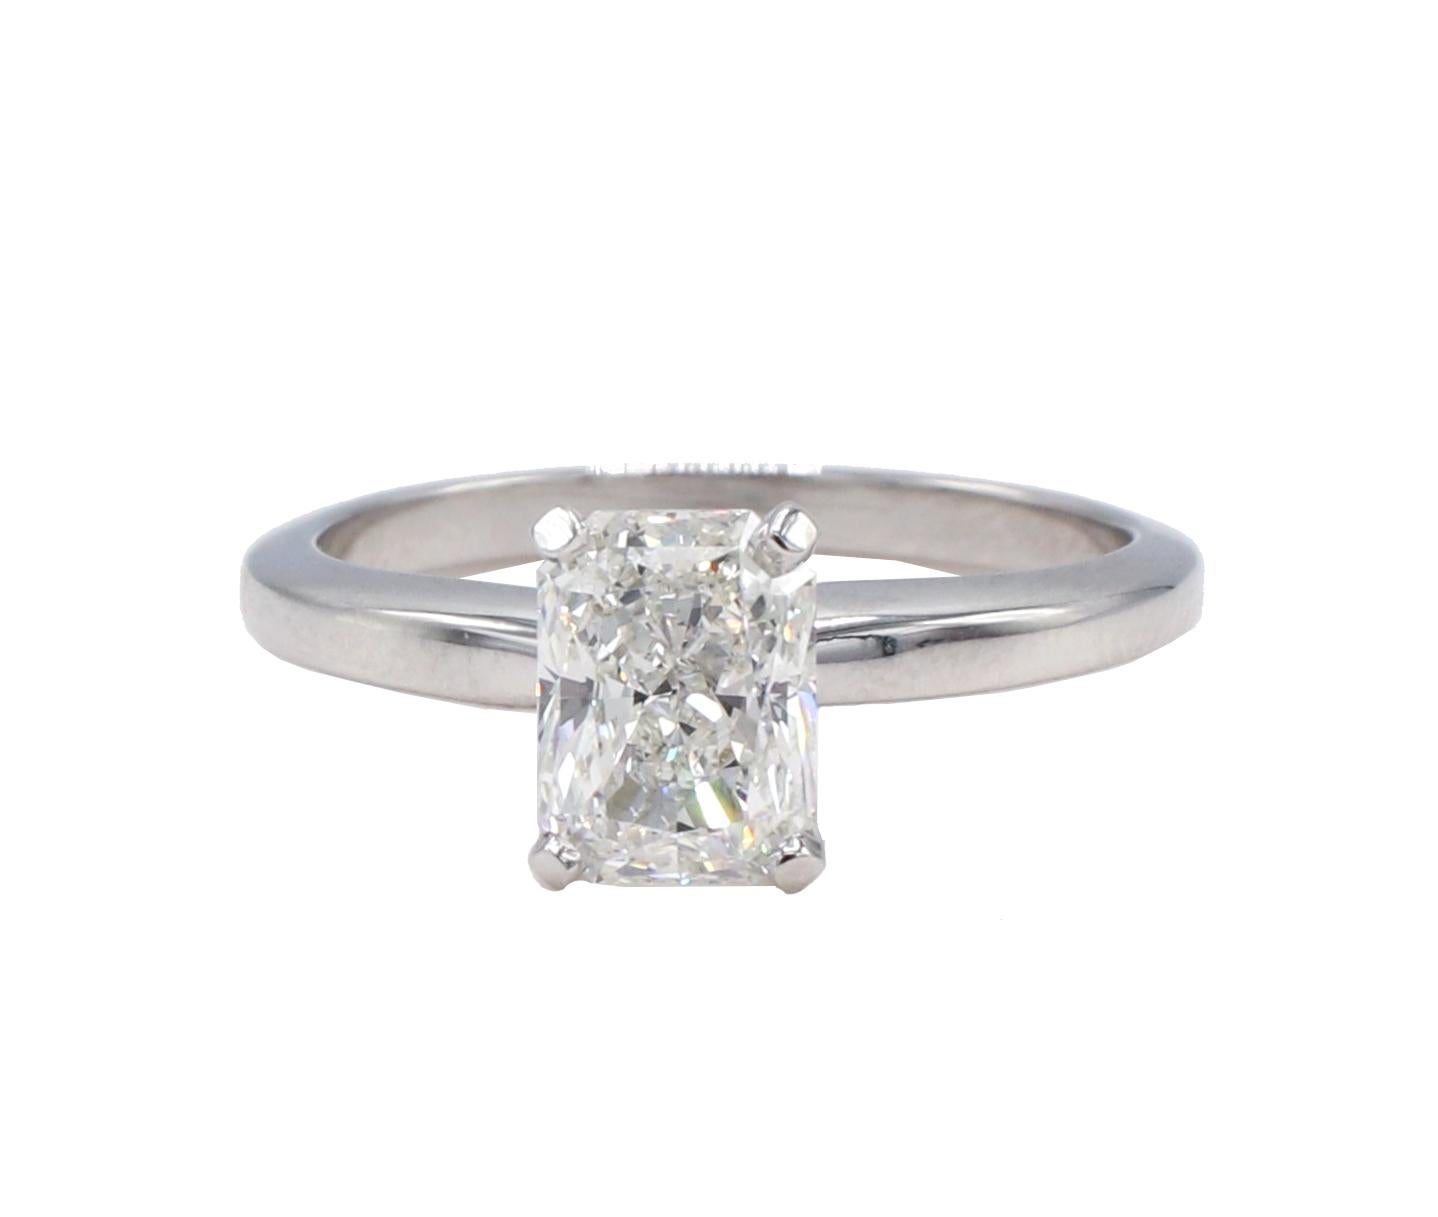 GIA Certified 1.11 Carat I VS1 Radiant Natural Diamond Solitaire Engagement Ring
GIA report number: 2223814905
Diamond: 1.11 carat I VS1 radiant shaped natural diamond
Metal: 14k white gold
Weight: 3.95 grams
Size: 5.25  (US)
Height: 6.2mm
